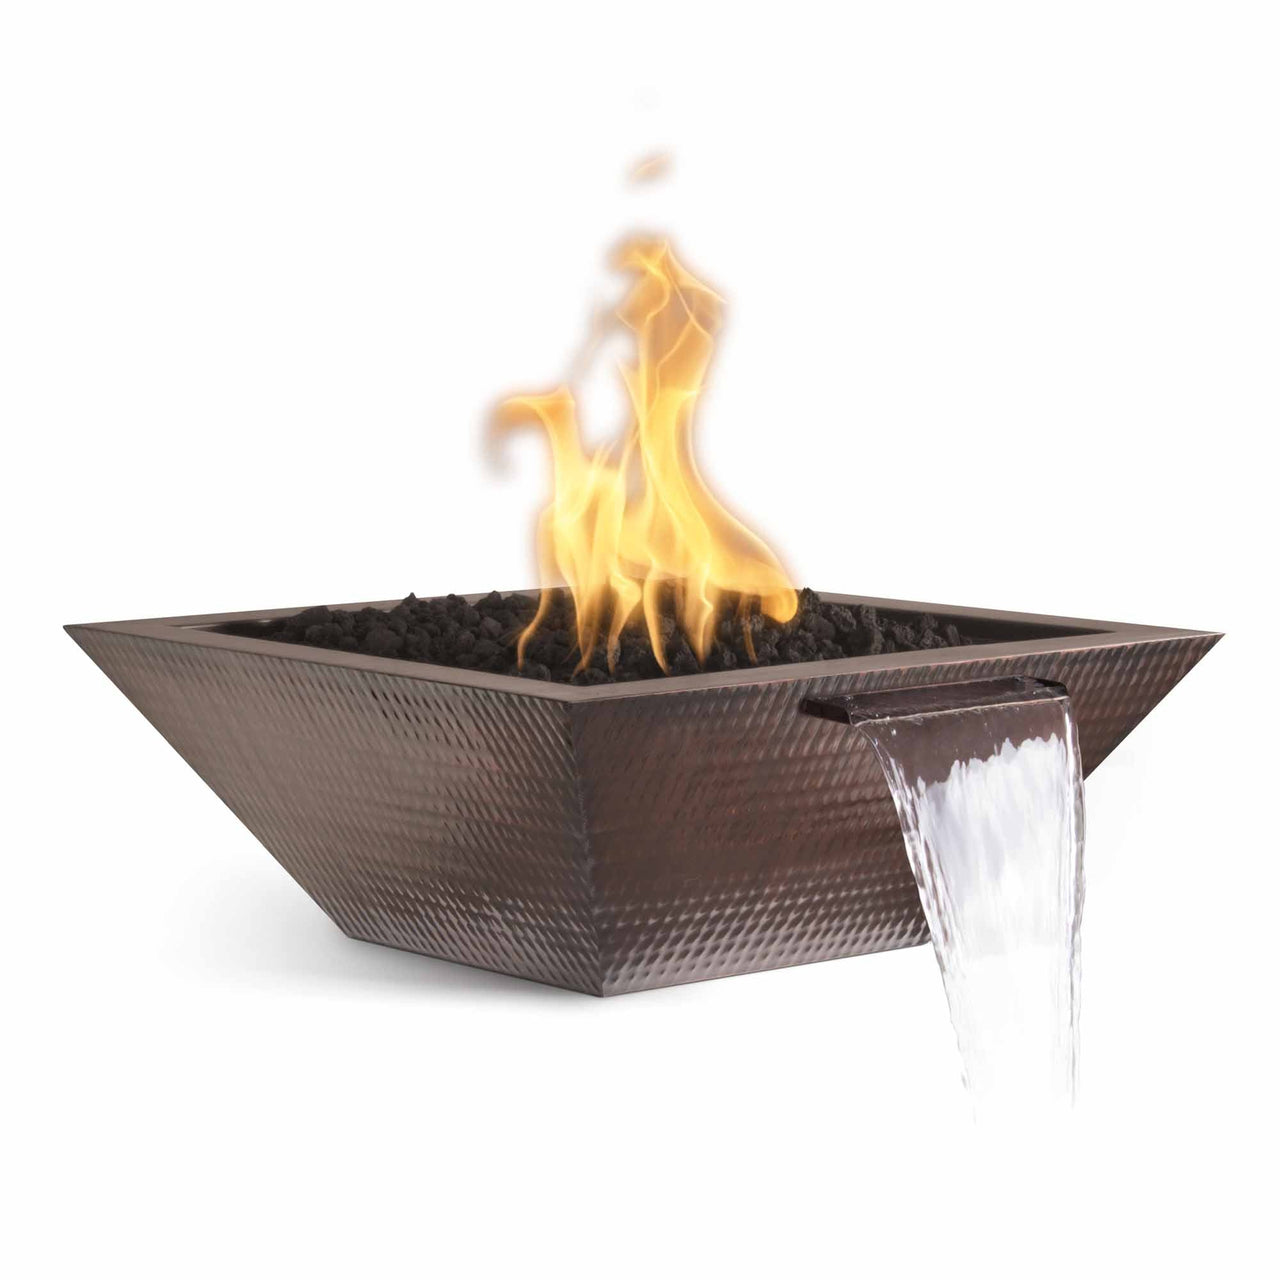 The Outdoor Plus 30" Maya Hammered Copper Square Fire and Water Bowl